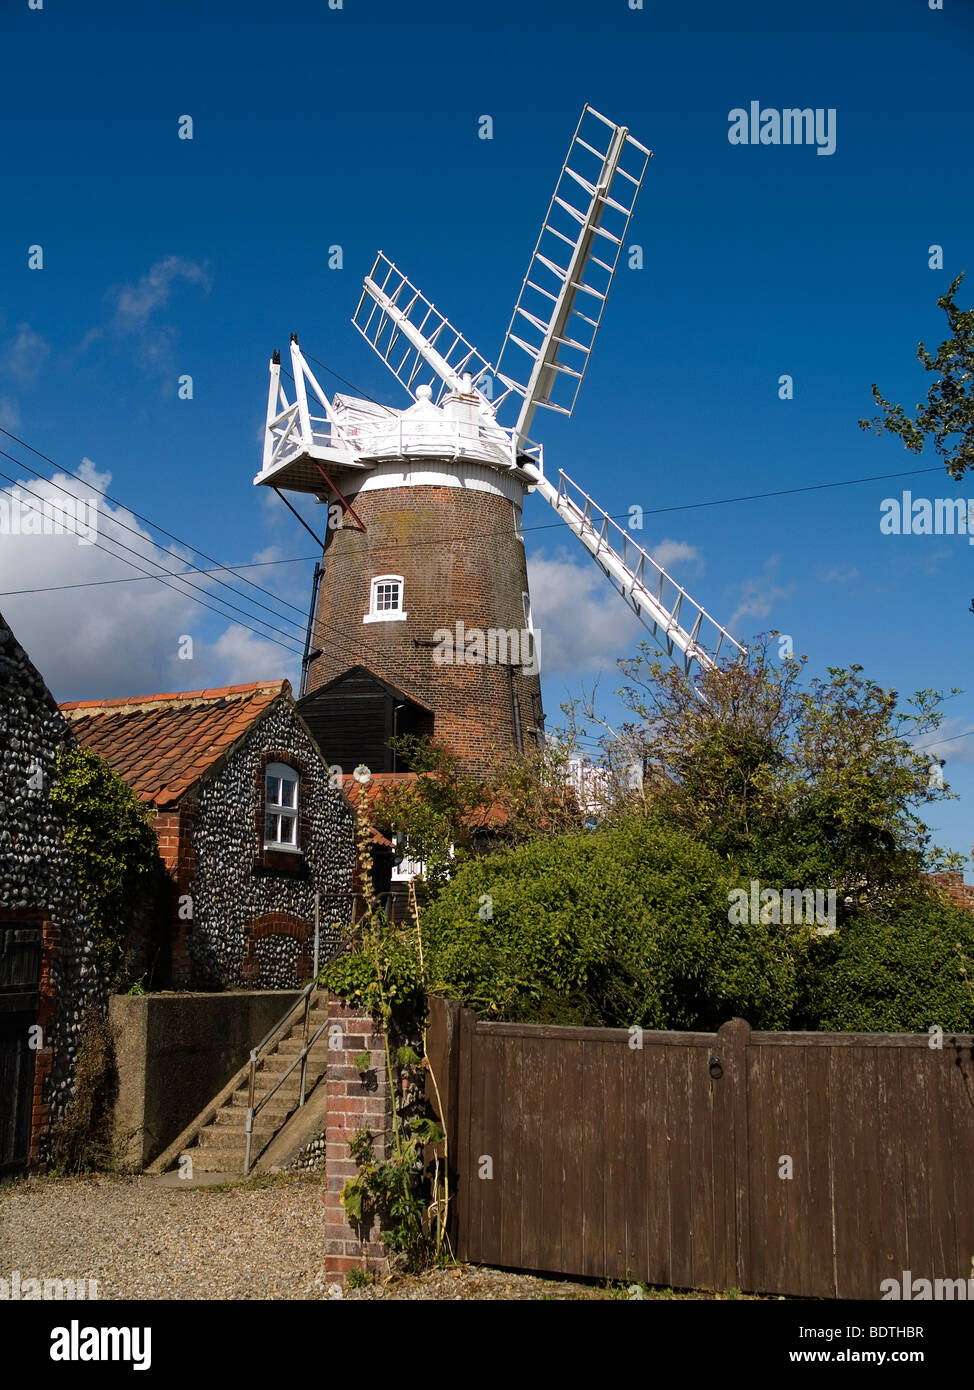 The old windmill at Cley next the Sea North Norfolk Stock Photo